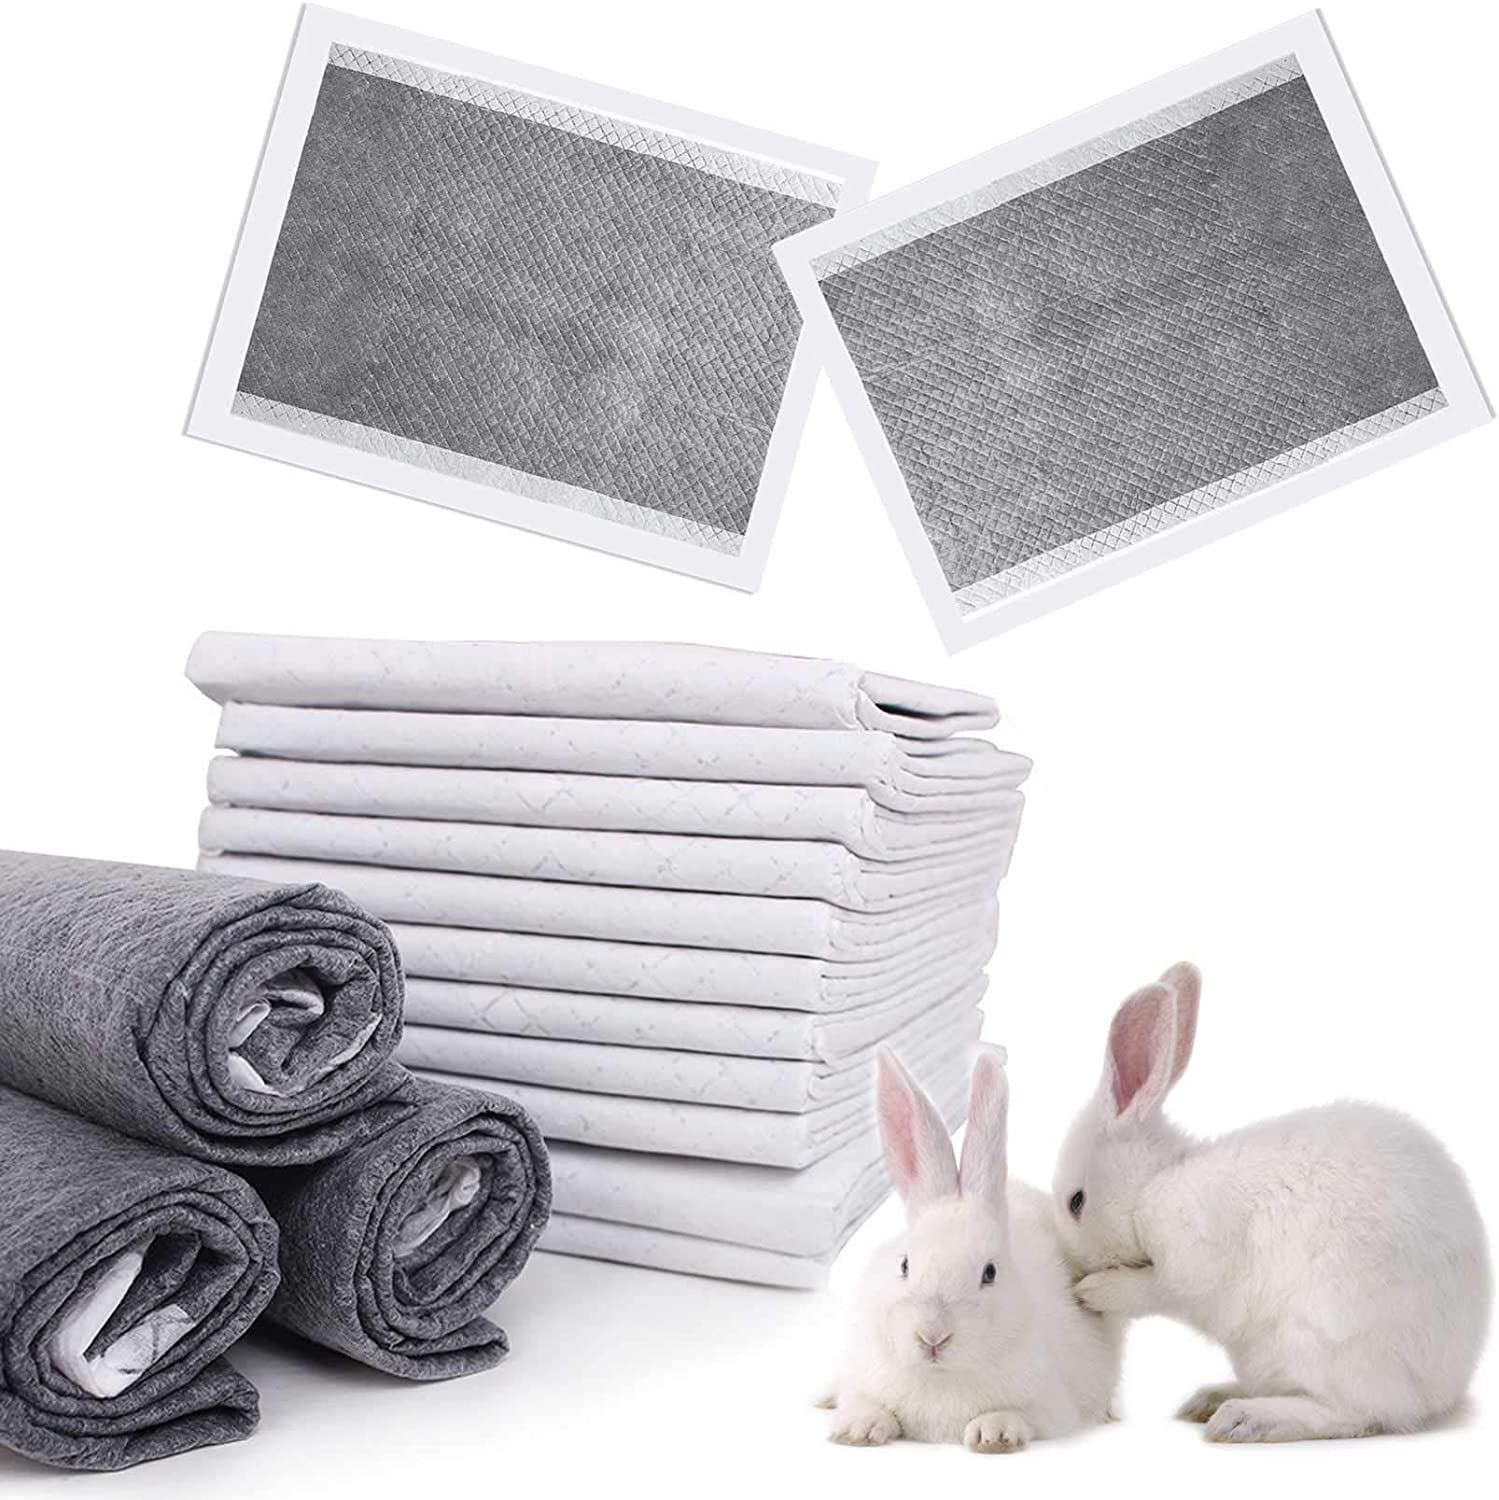 Kathson Rabbit Pee Pads Disposable Cage Liners 50PCS All-Absorb Black Carbon Odor-Control Bunny Training Accessories with Quick-Dry Surface for Puppy Guinea Pig Kitten Hedgehog Small Animals Animals & Pet Supplies > Pet Supplies > Small Animal Supplies > Small Animal Bedding kathson   